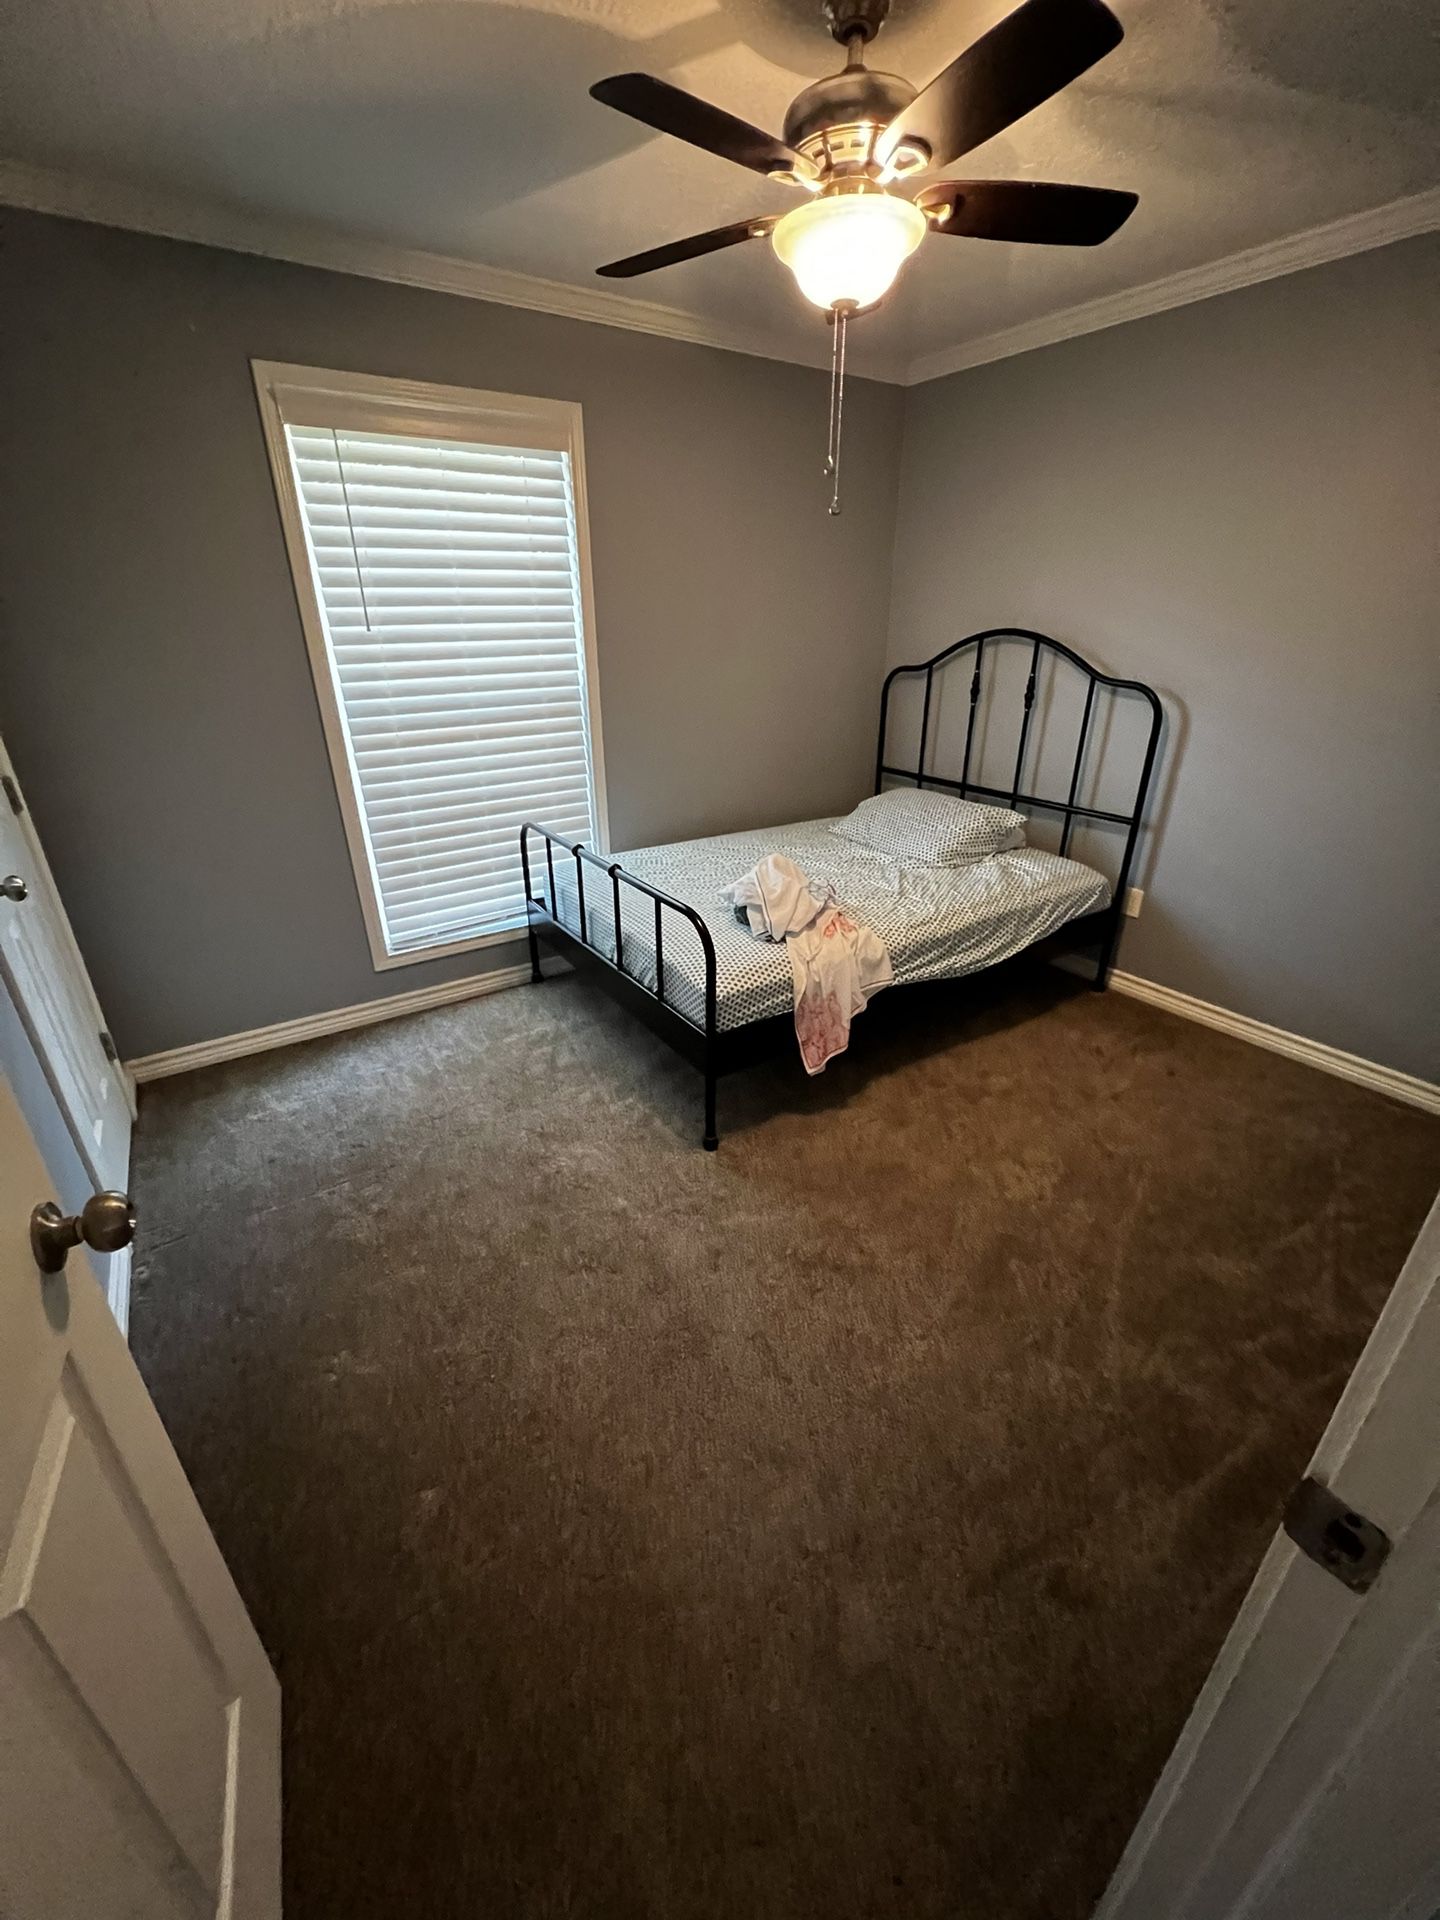 Full Bed With Mattress 